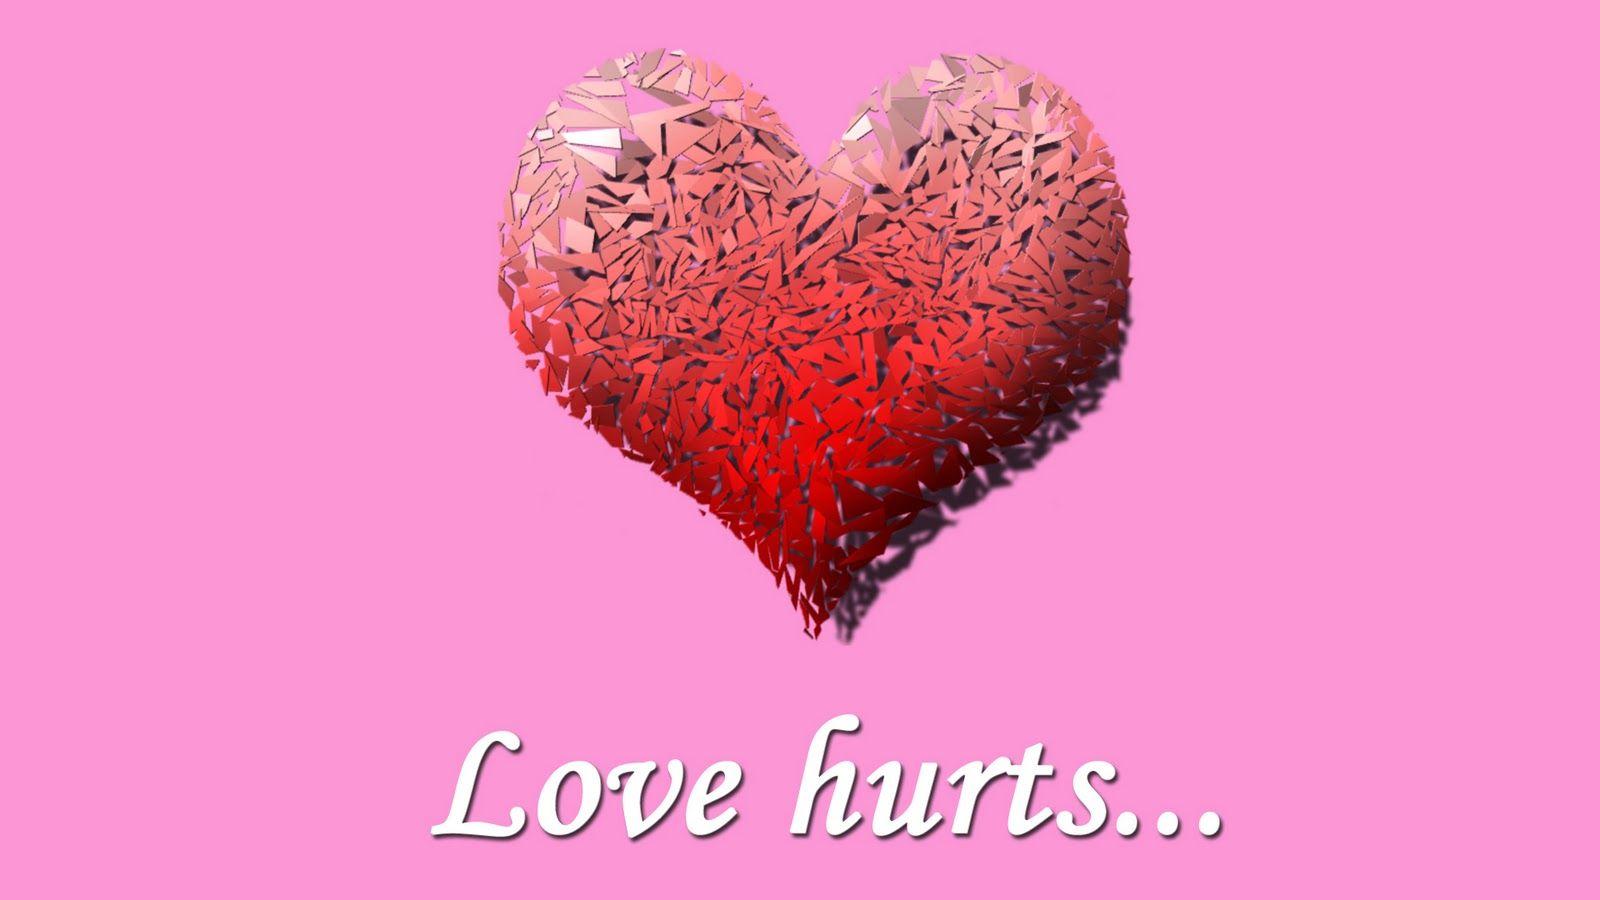 Love Hurts Wallpaper (Picture)